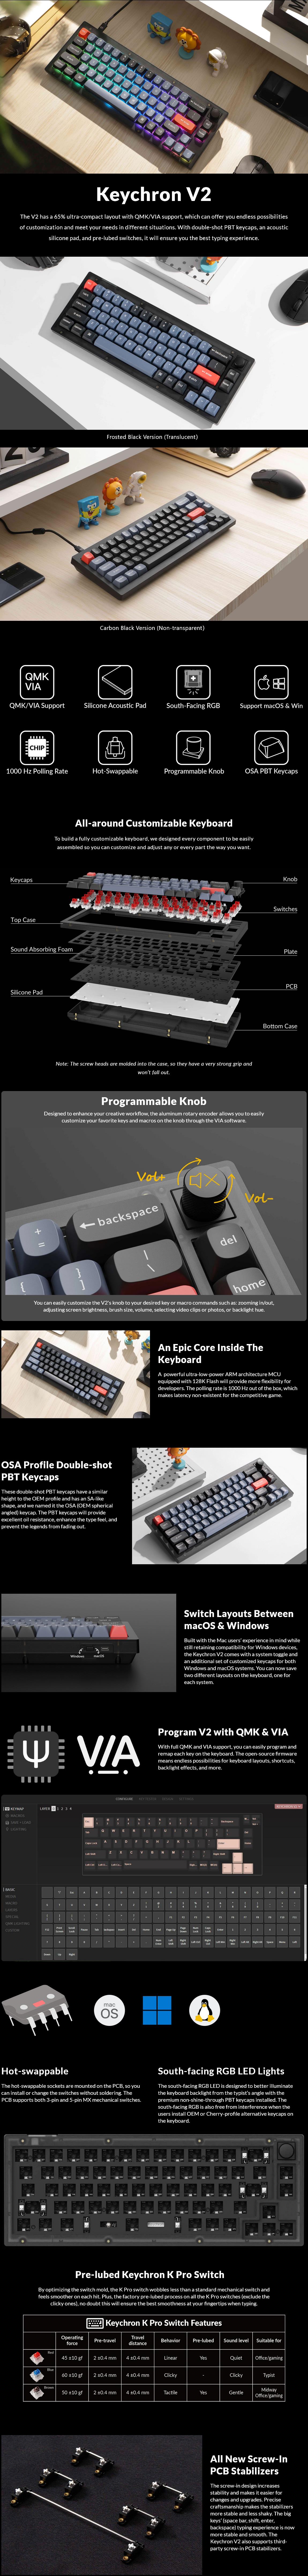 A large marketing image providing additional information about the product Keychron V2 65% Mechanical Keyboard - Carbon Black (Brown Switch) - Additional alt info not provided